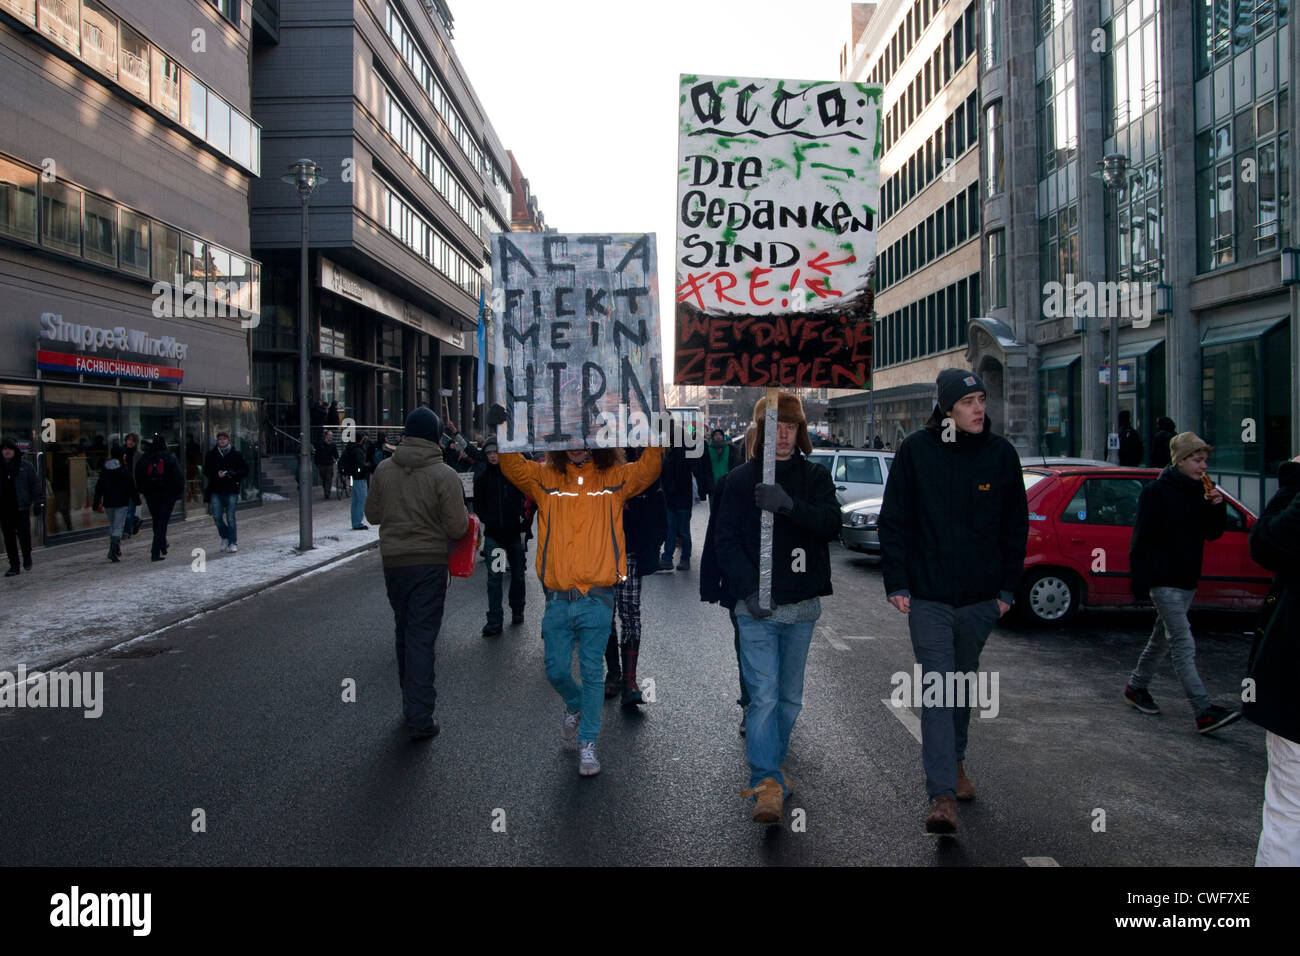 Anti Acta demonstration in Berlin. Protesters hold signs. Stock Photo